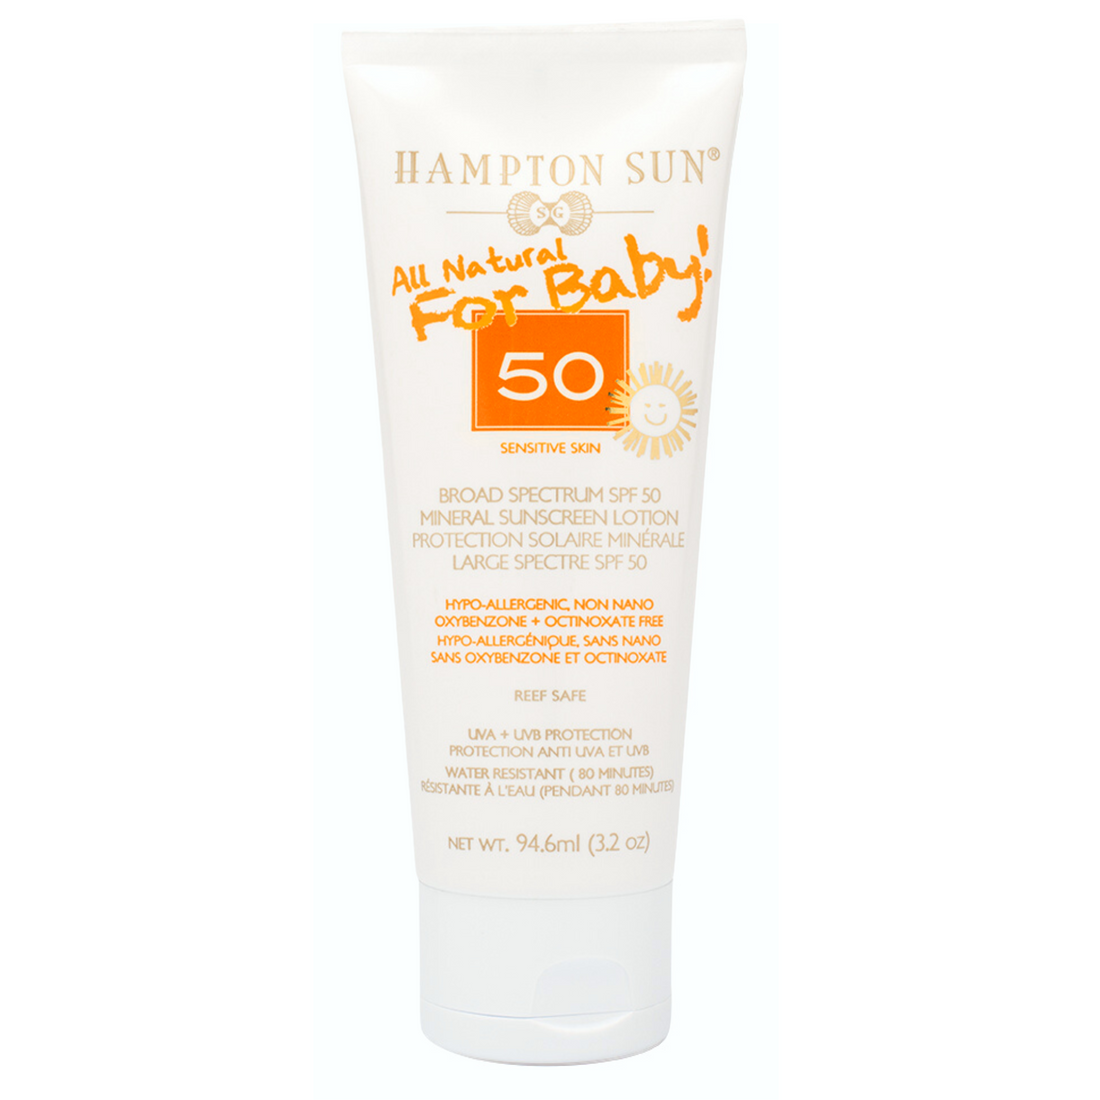 All Natural SPF 50 Mineral Lotion for Baby